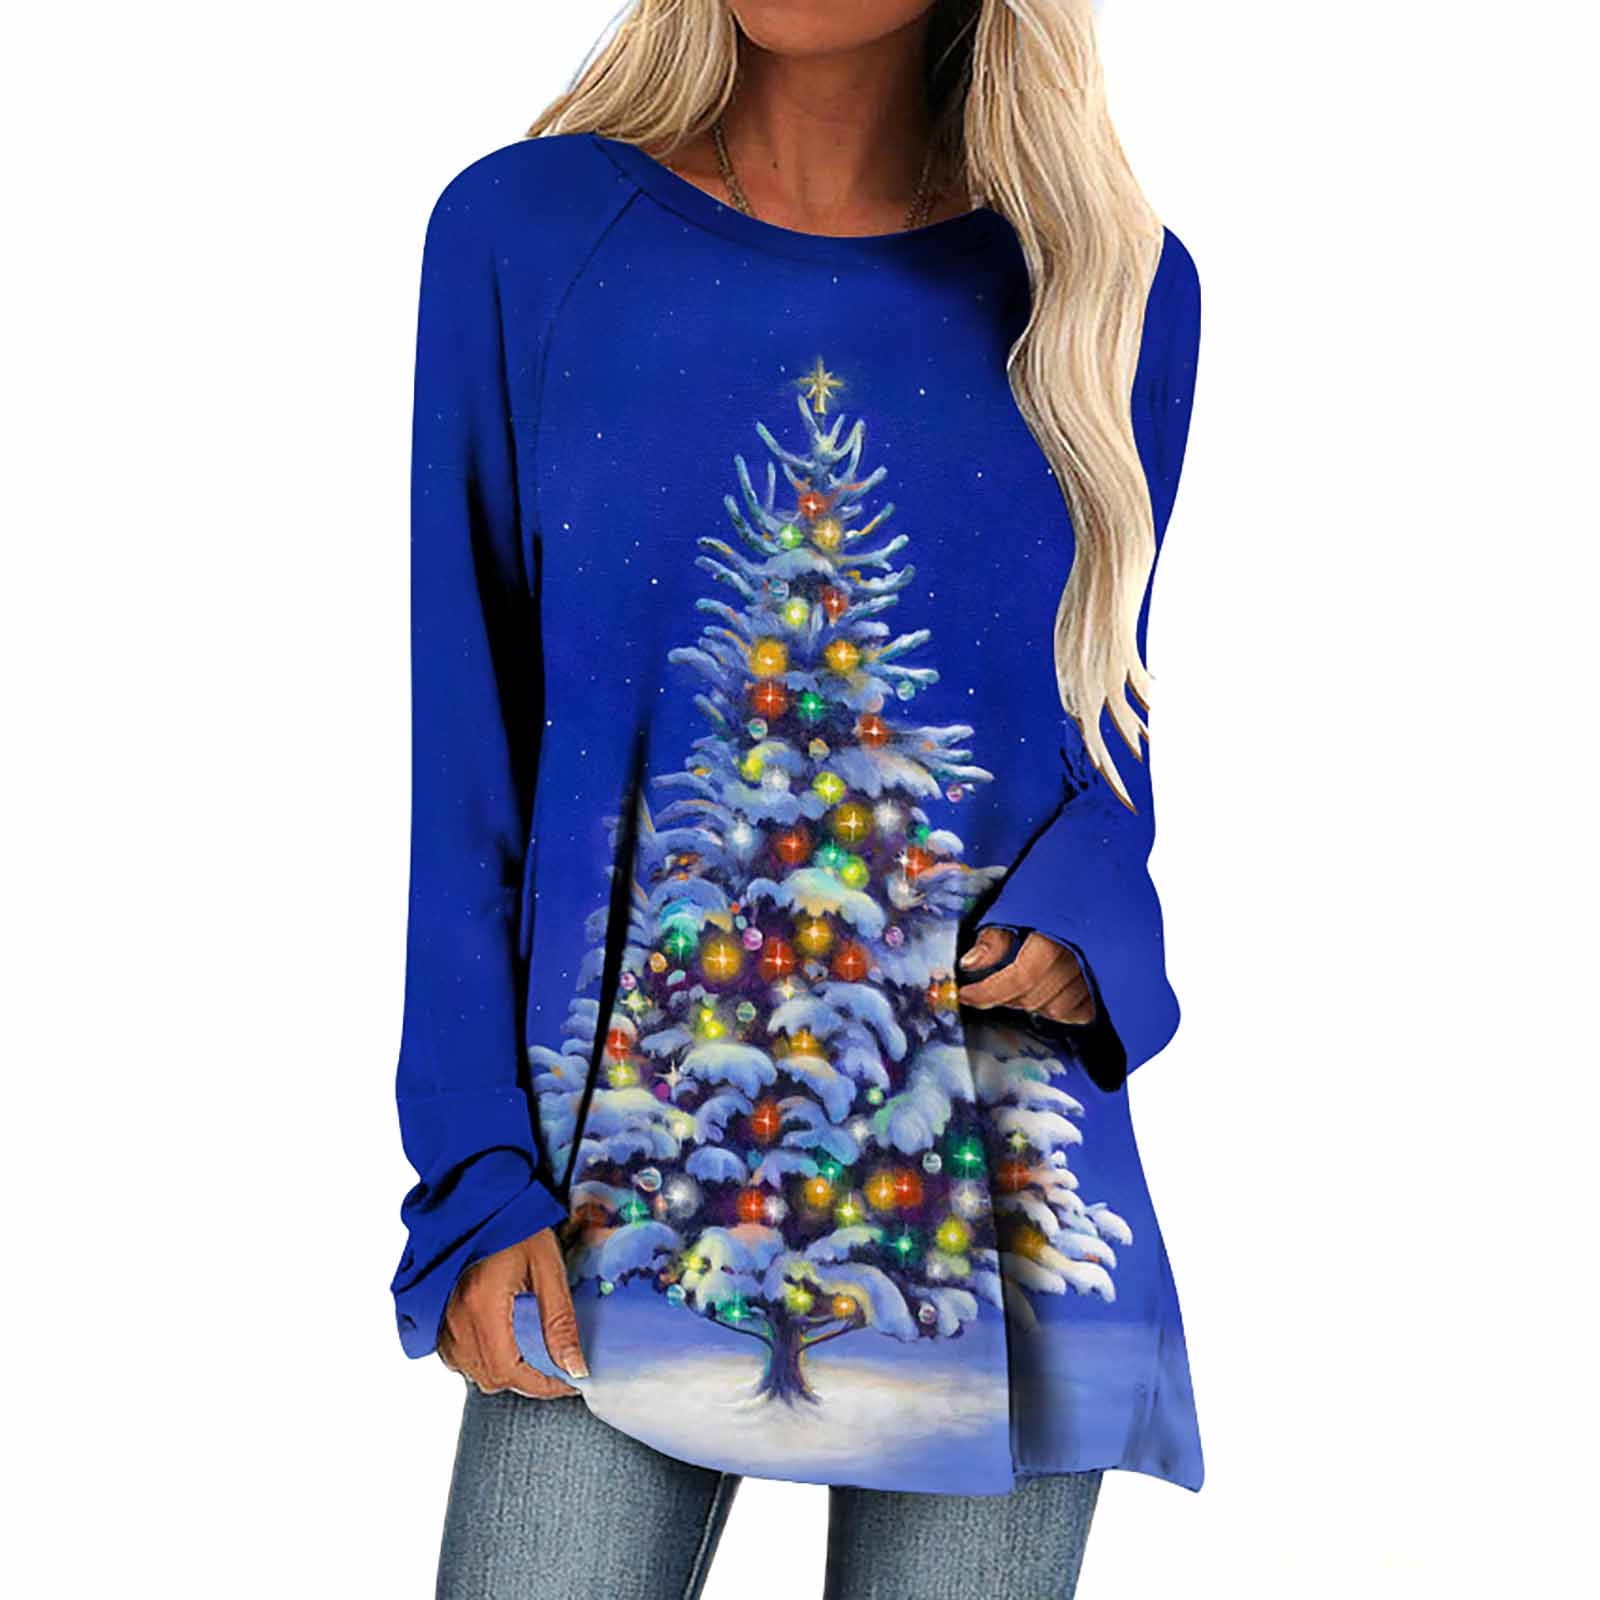  Womens Oversized Sweaters,Vintage Sweaters,Fall  Outfits,Ugly,Sale Clearance Items Under 5 Dollars,Bulk Tshirts for Printing  Wholesale Unisex,Your Orders Placed Recently by me on Prime Beige :  Clothing, Shoes & Jewelry